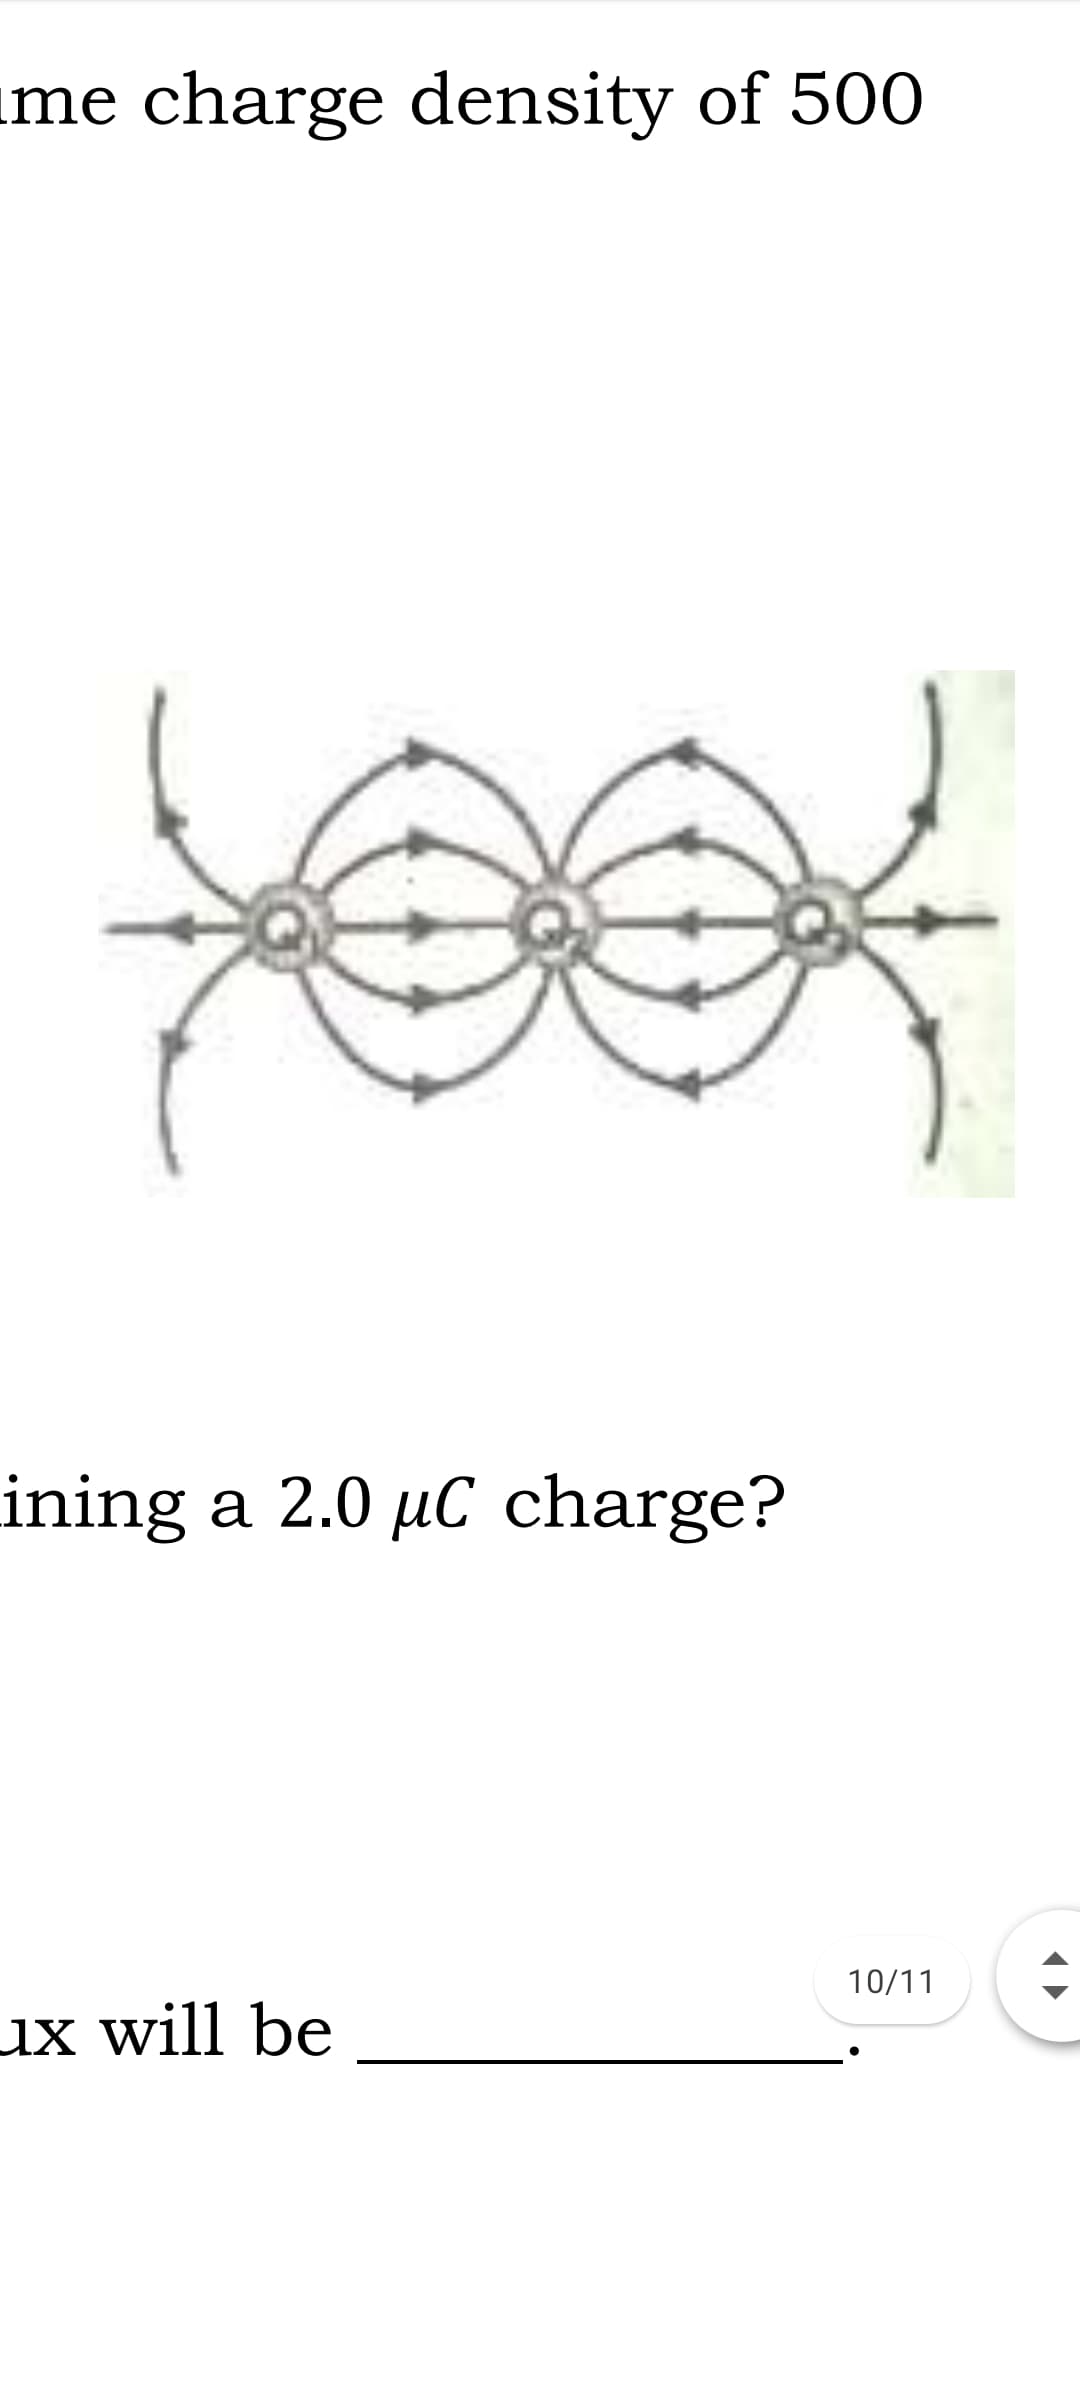 ime charge density of 500
ining a 2.0 µC charge?
10/11
ux will be
